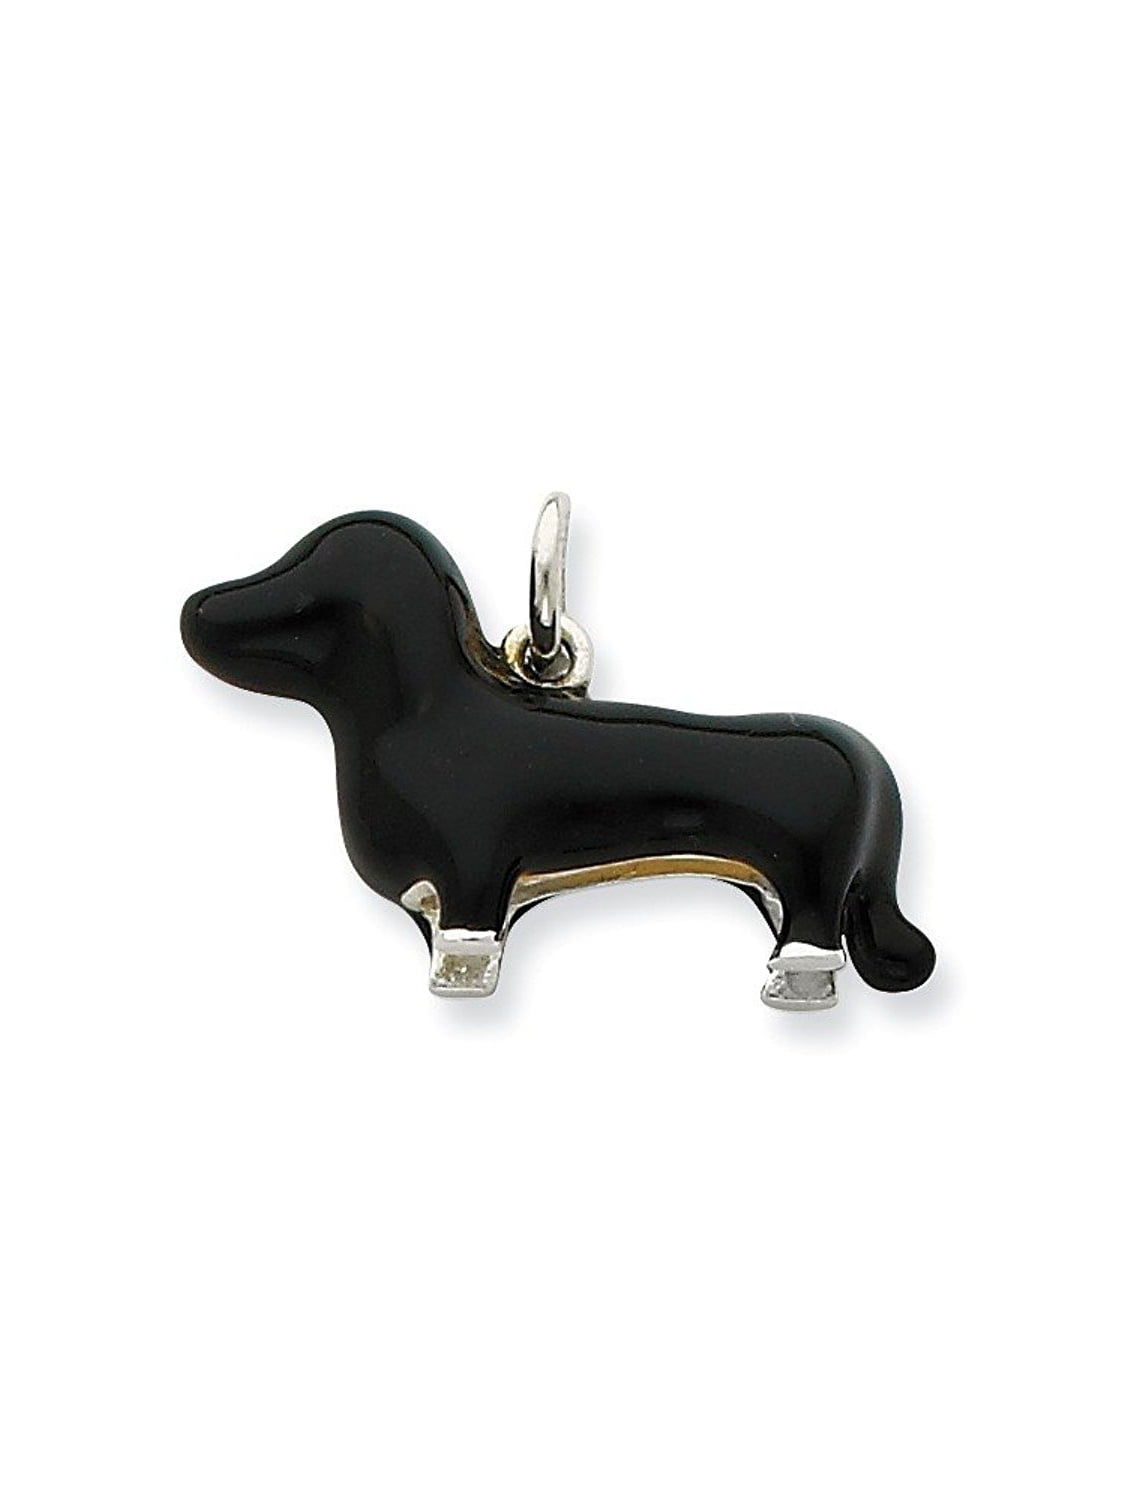 Top 10 Jewelry Gift Sterling Silver Enameled Dachshund Charm 